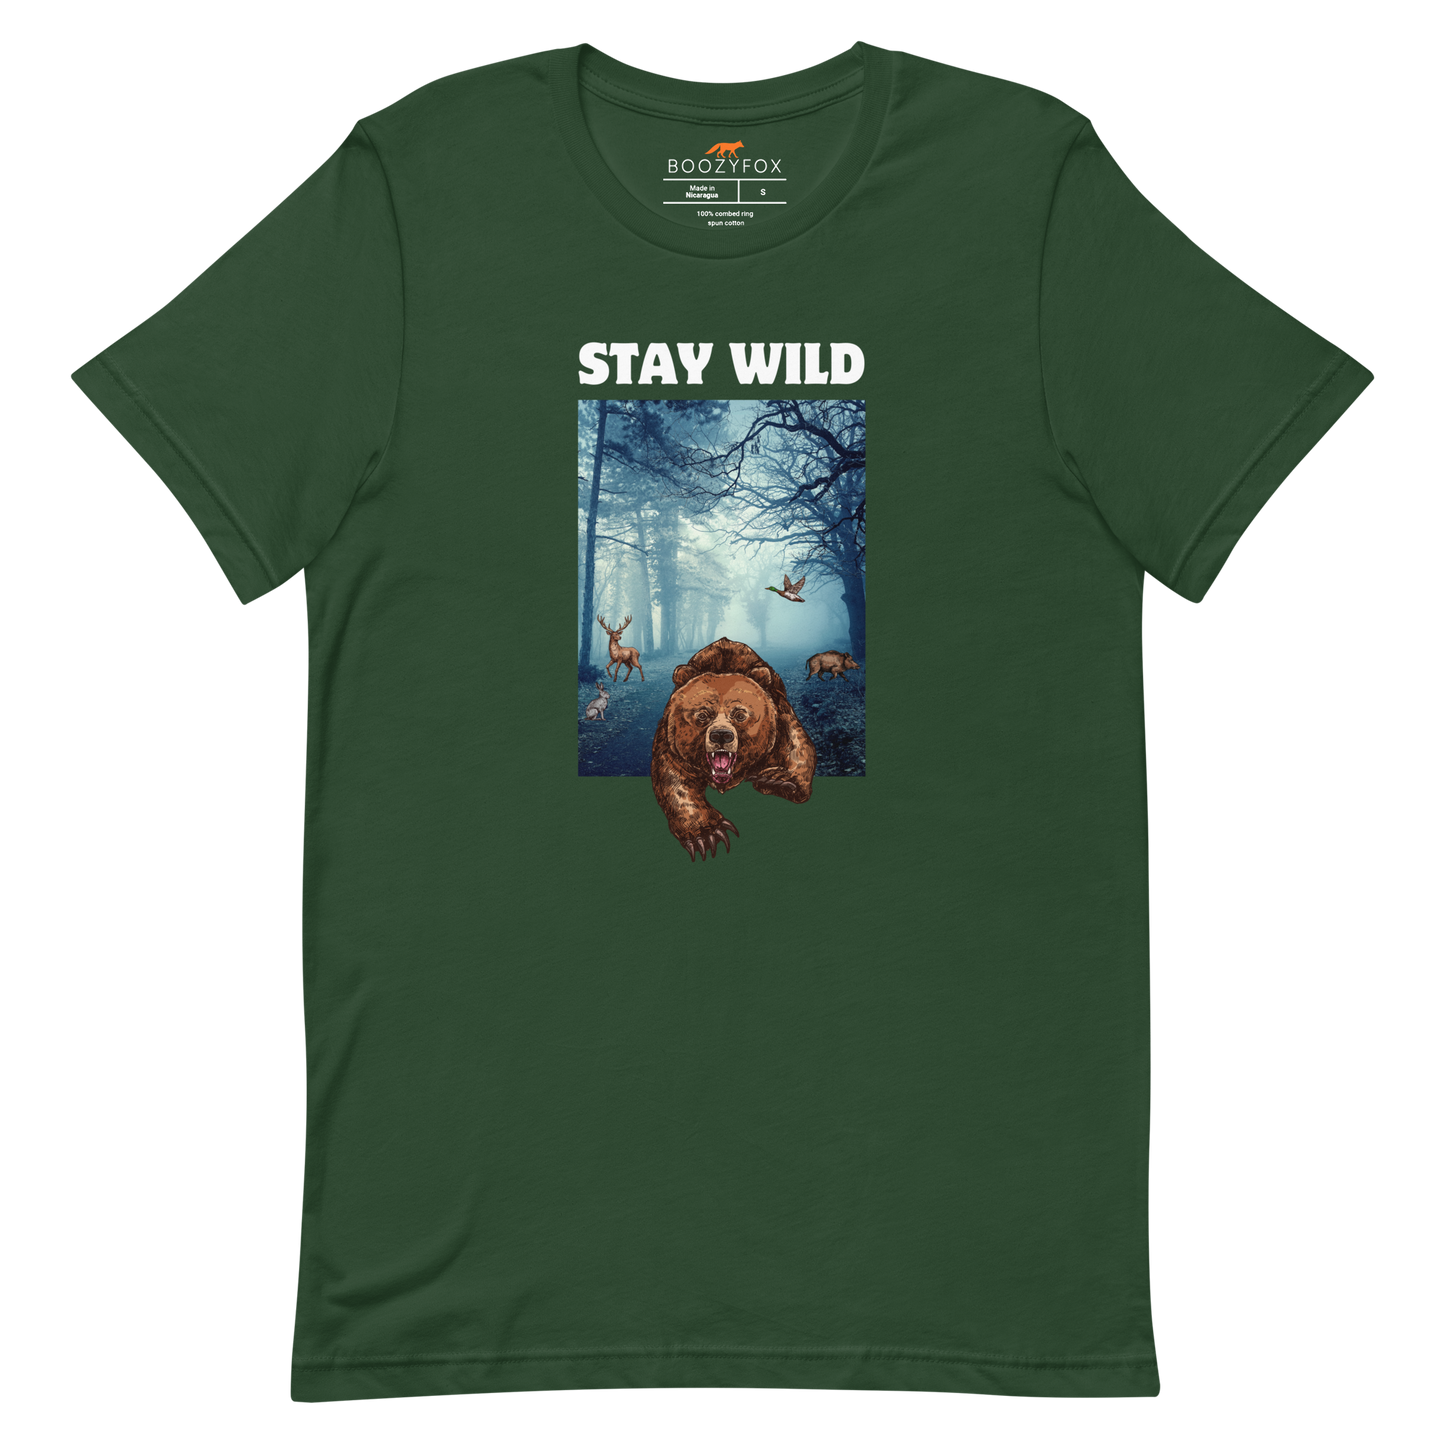 Forest Green Premium Bear Tee featuring a Stay Wild graphic on the chest - Cool Graphic Bear Tees - Boozy Fox